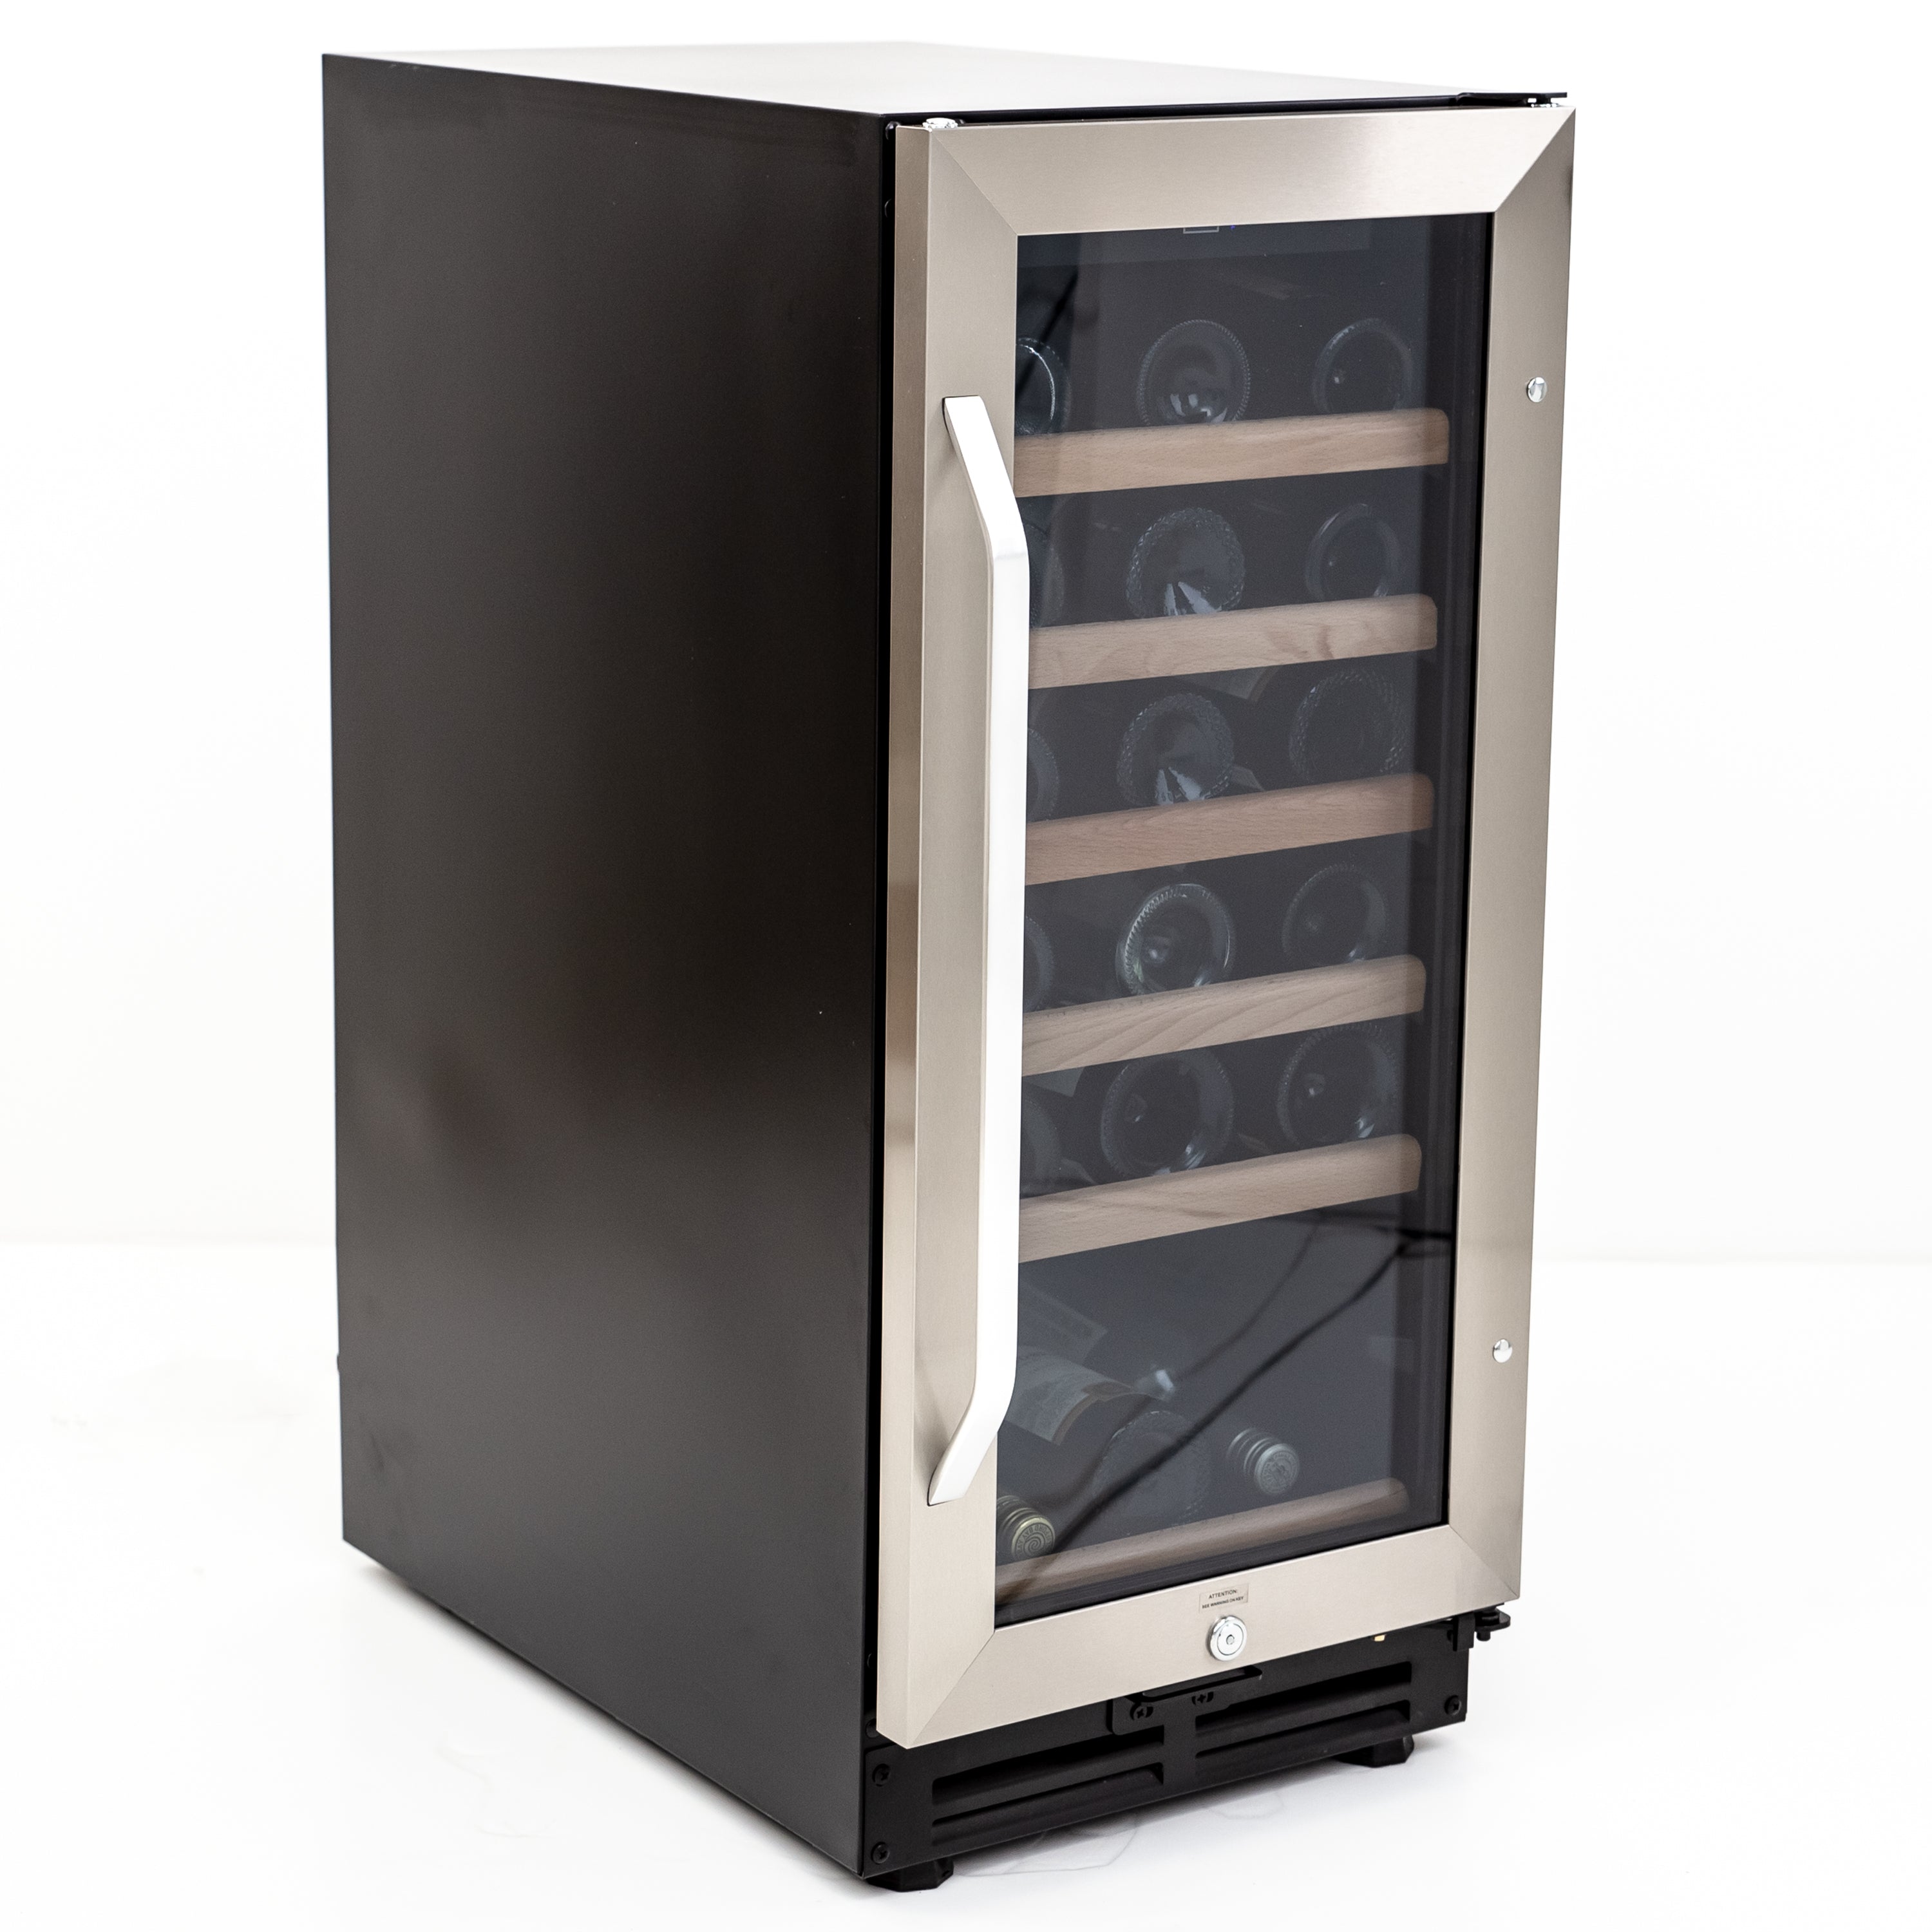 Avanti - WC3015S3S, Avanti Wine Cooler with Wood Accent Shelving, 30 Bottle Capacity, in Stainless Steel